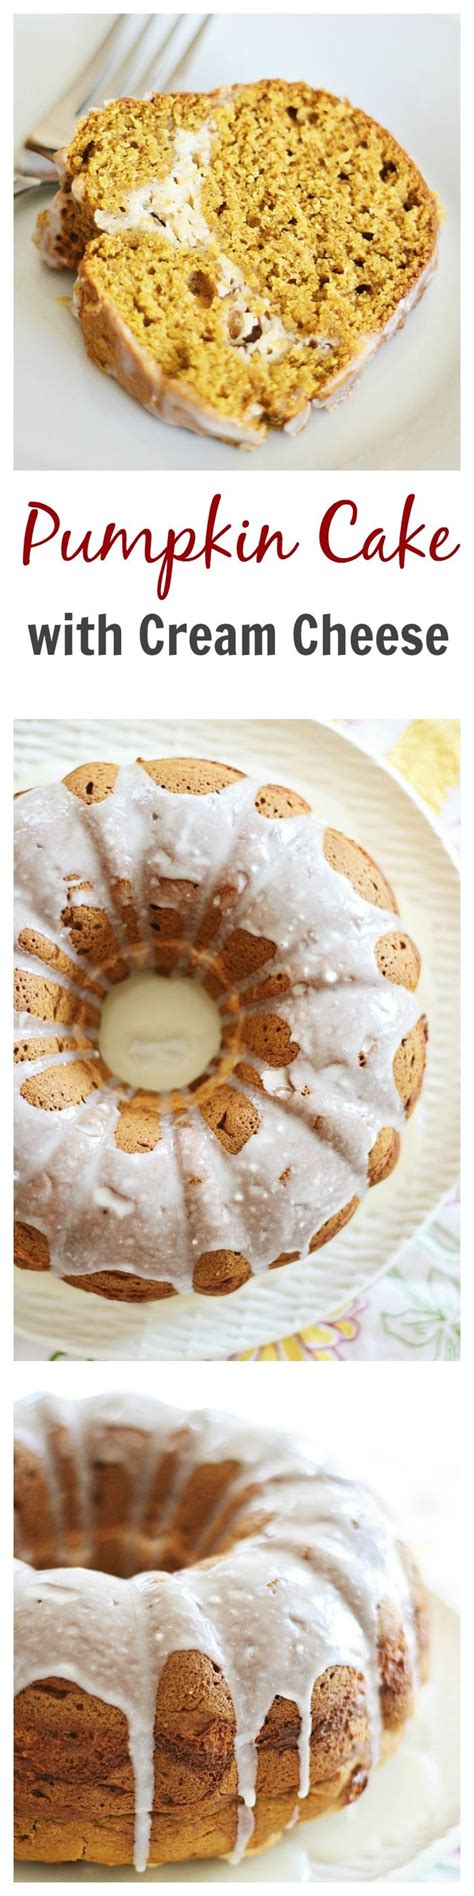 In a stand mixer, beat the cream cheese with the. Sweet pumpkin cream cheese bundt cake recipe with pumpkin ...